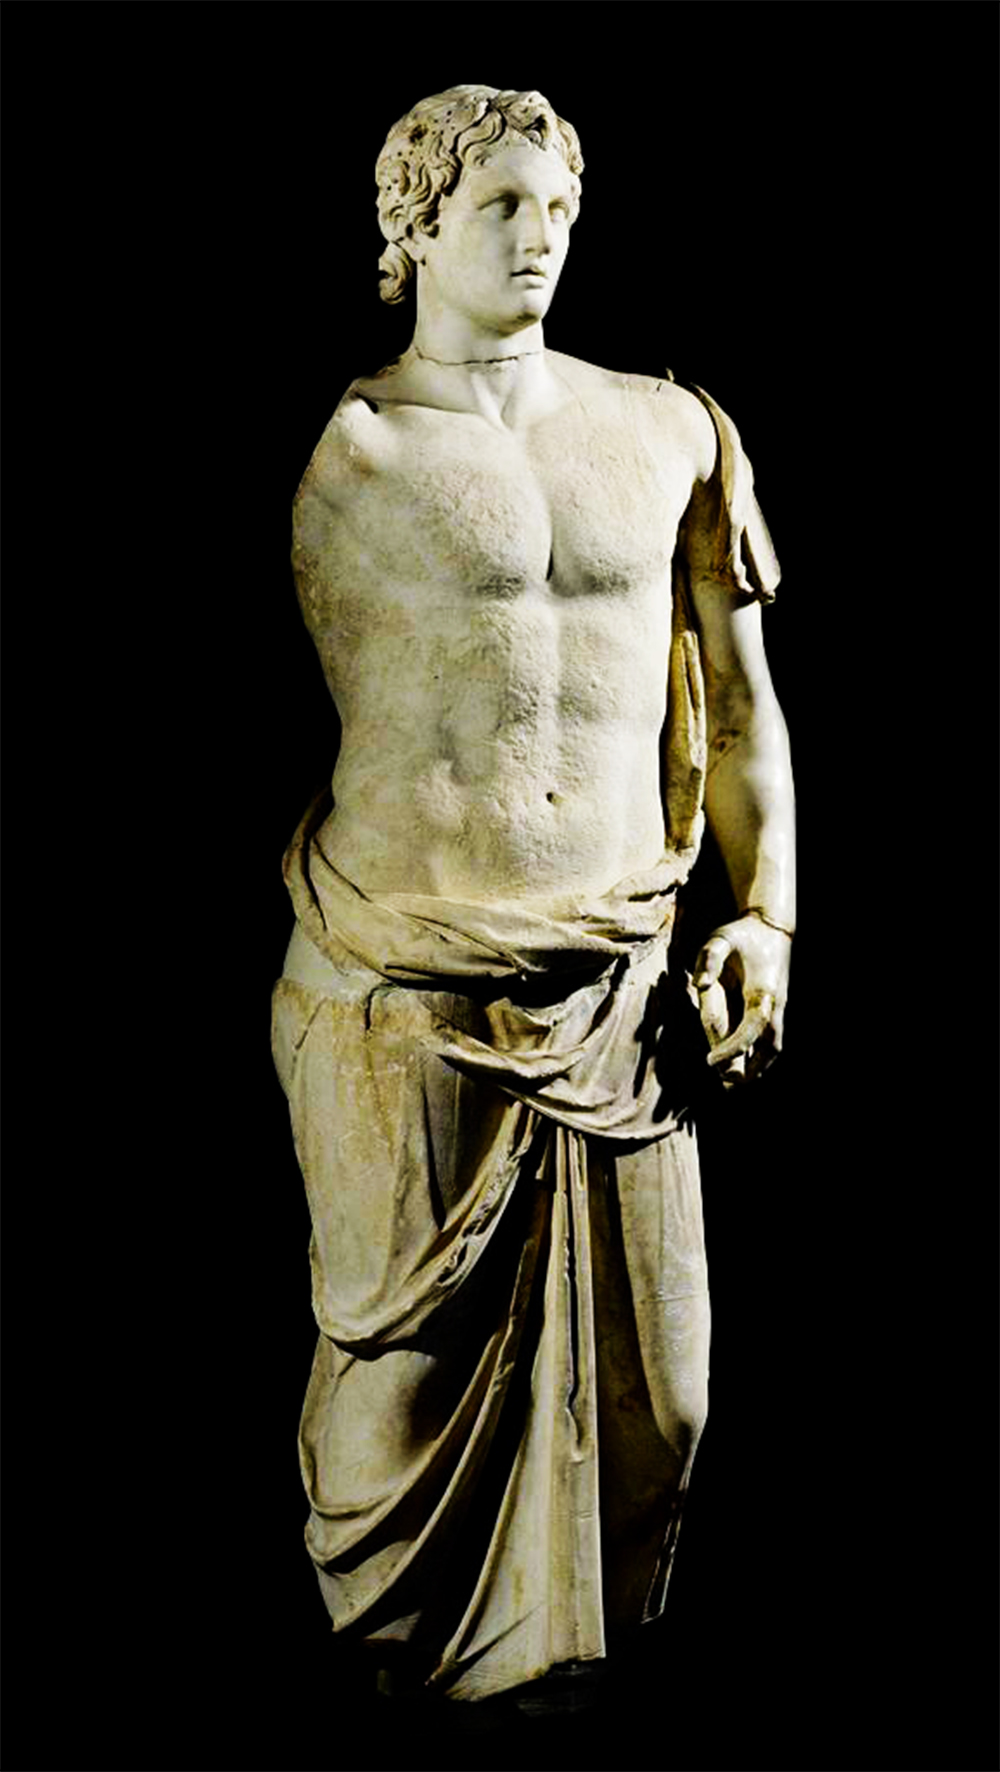 Marble statue of Alexander the Great from the Hellenistic period, draped in a himation. The sculpture captures a detailed representation of his face and curly hair, and is inspired by an original work by Lysippos from the late 4th or 3rd century BCE. The statue's torso is partially exposed, and the himation gracefully wraps around his lower body.